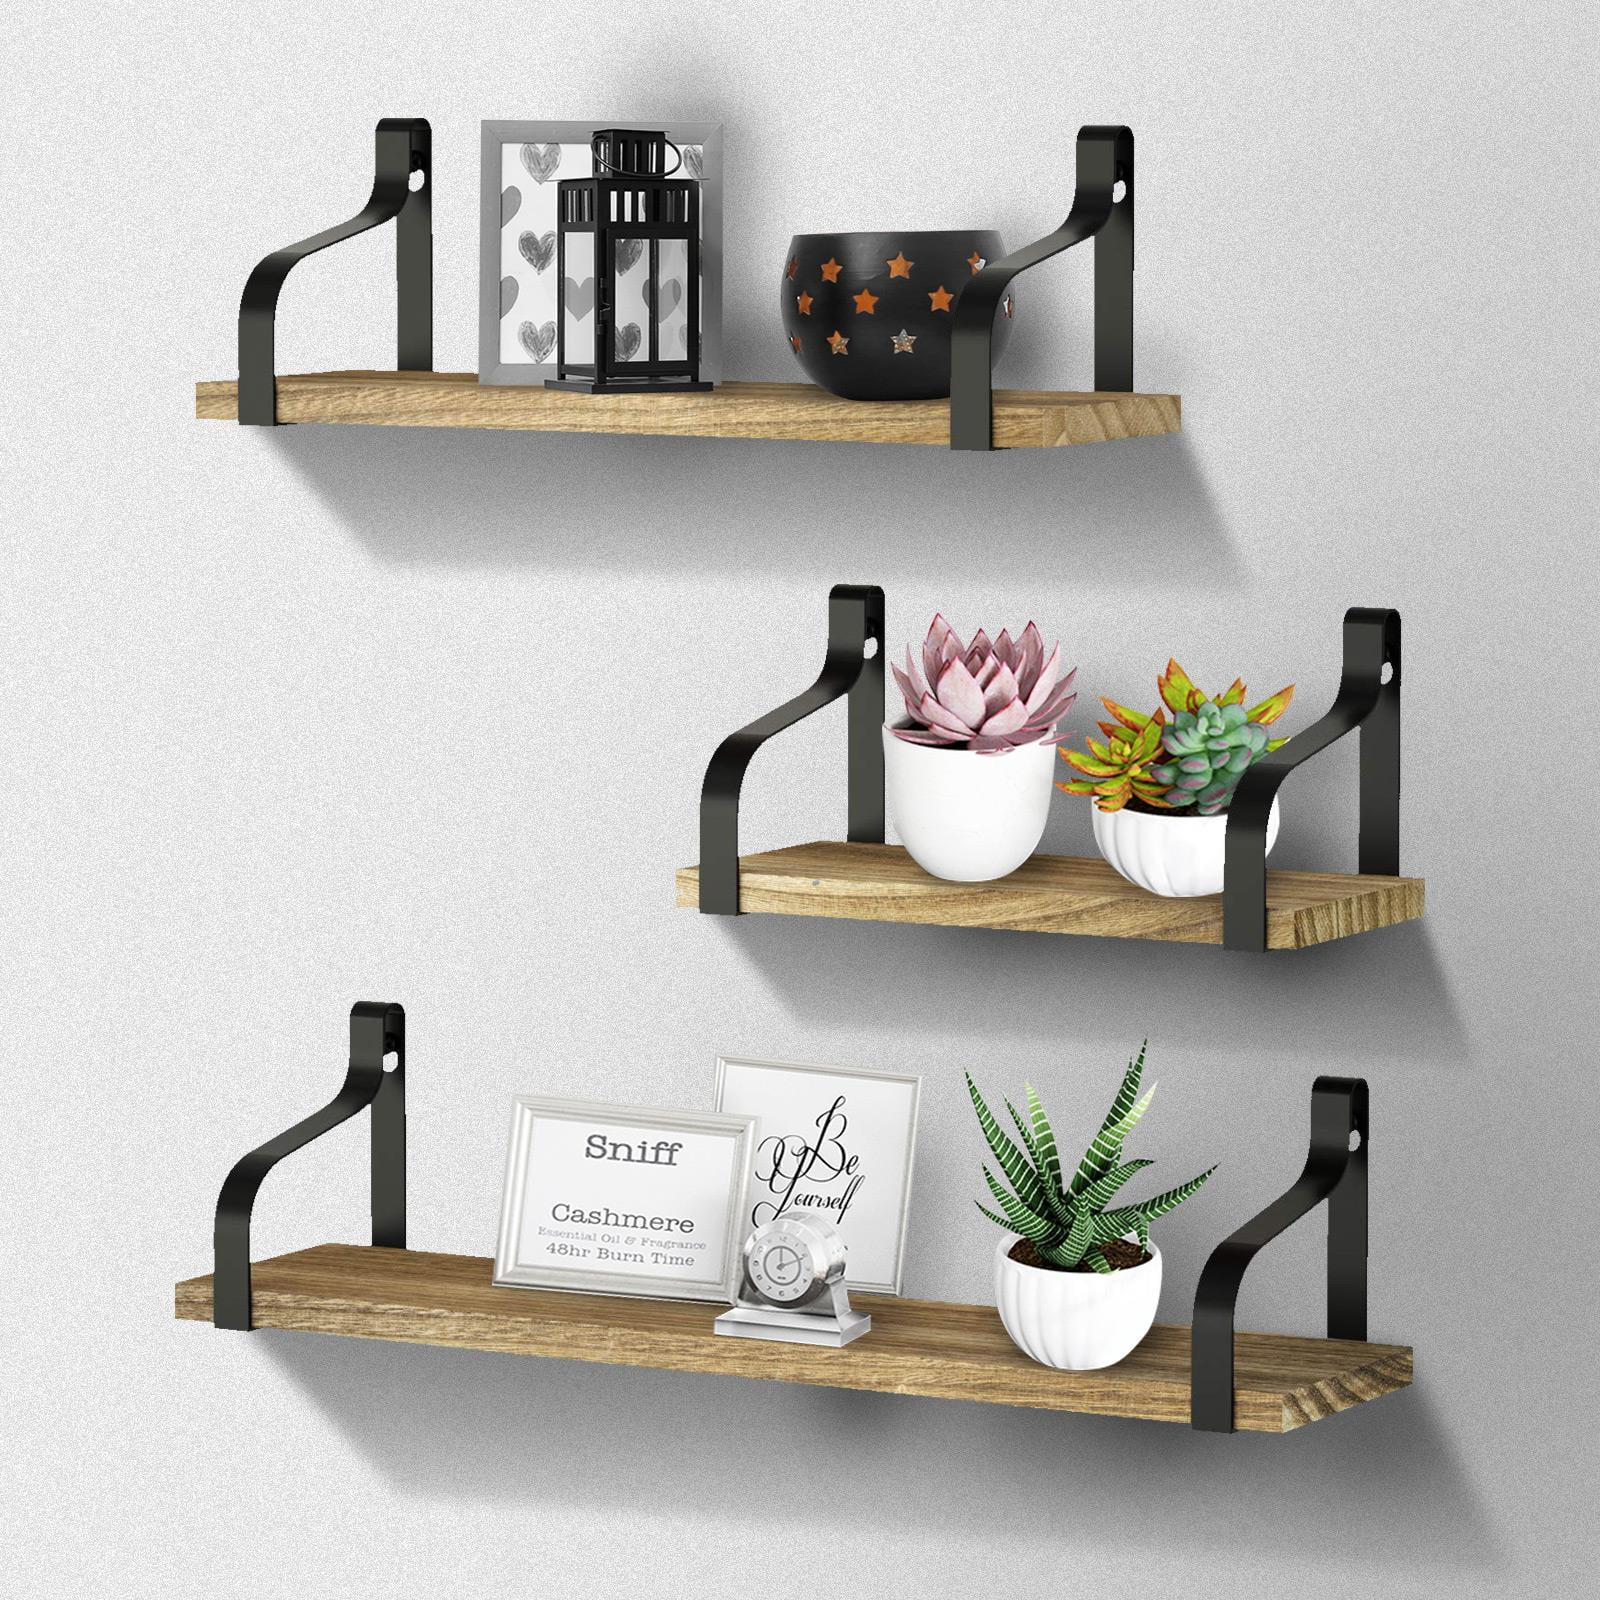 Details about   2PC Rustic Floating Shelves Storage Unit Rack Wall Decorative Display Chic Look 